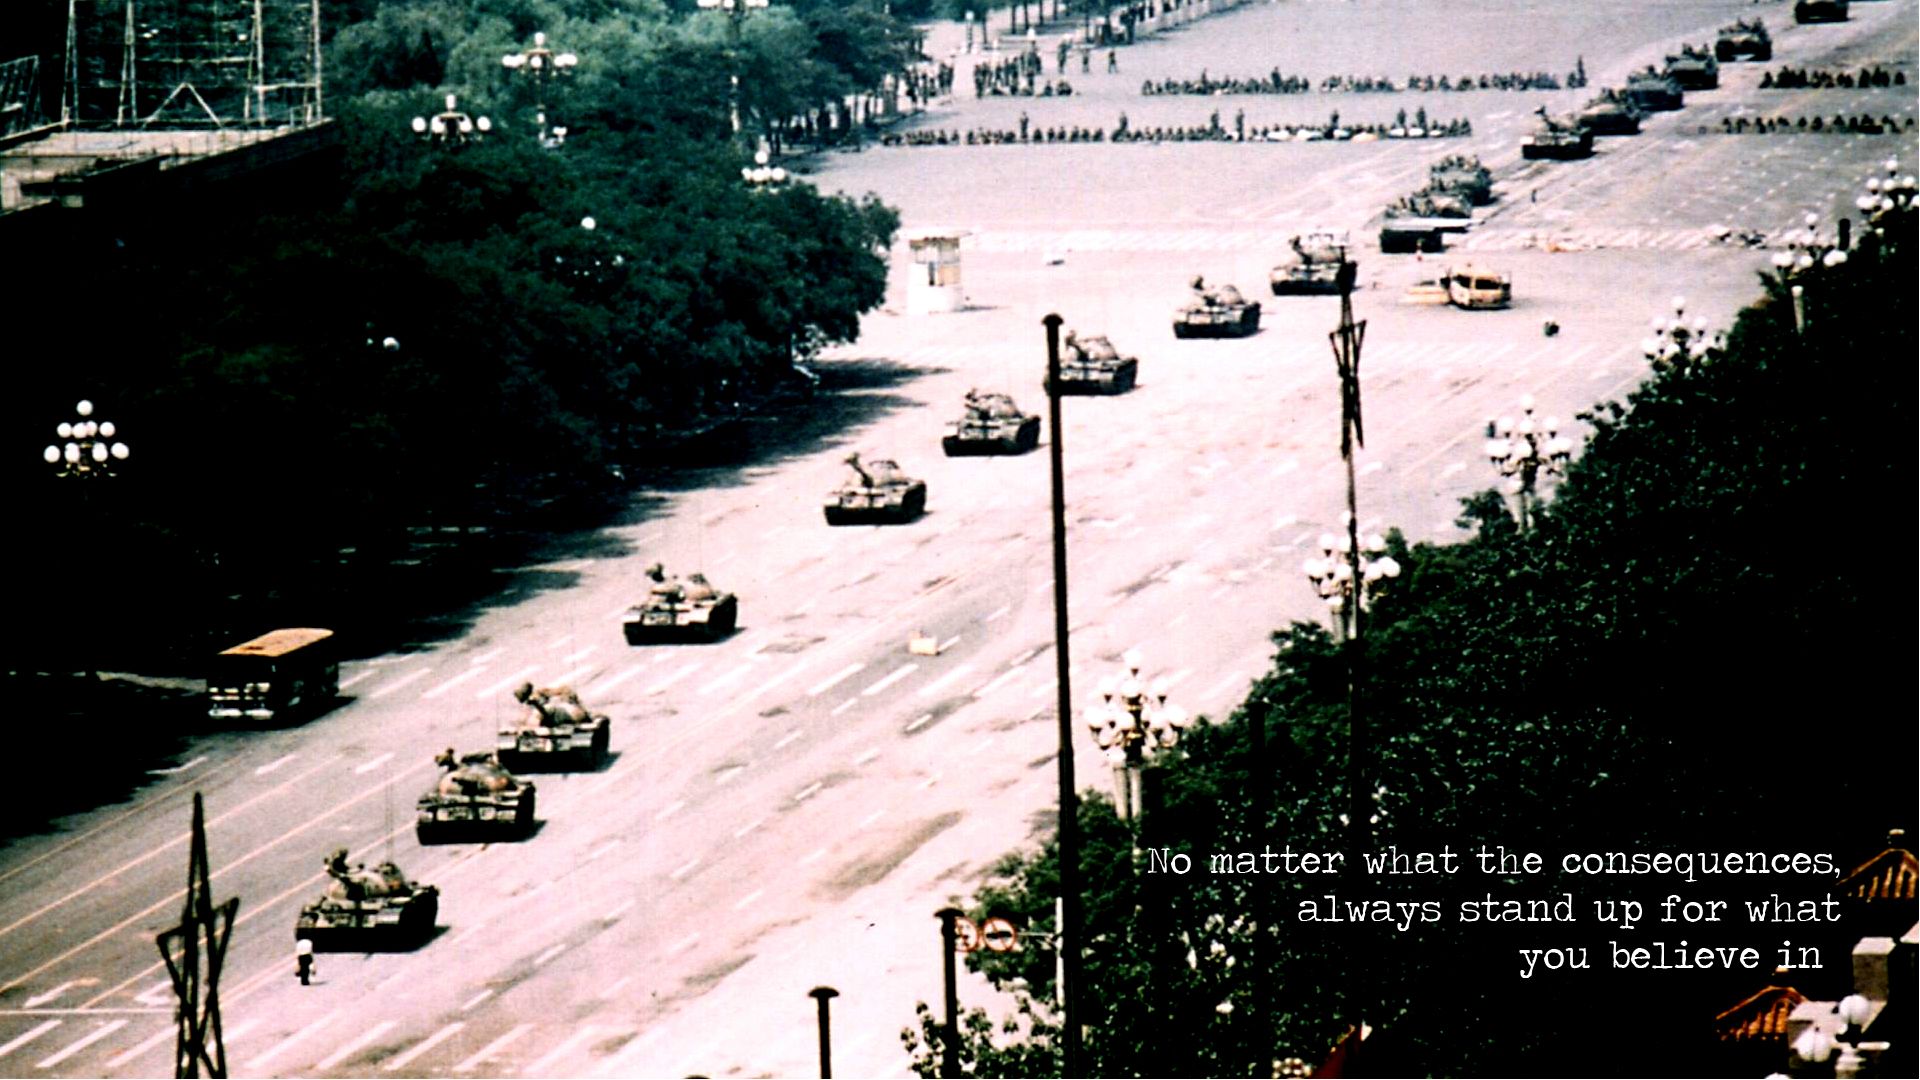 Consequences Wallpaper Tank Man War Revolution Or Create Some Lame